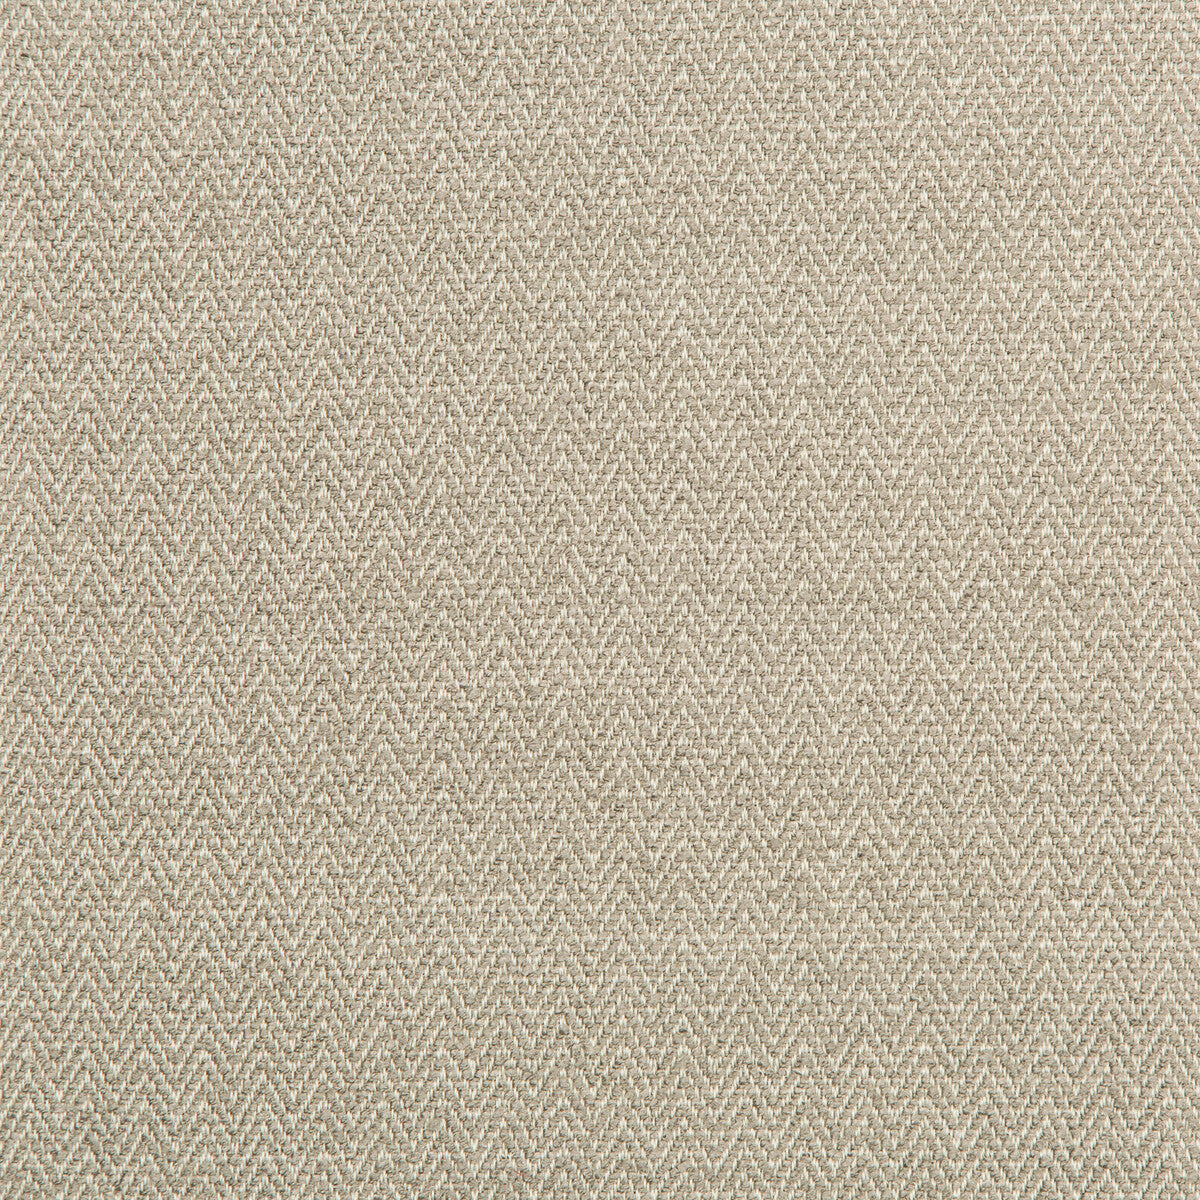 Mohican fabric in linen color - pattern 35883.11.0 - by Kravet Contract in the Gis Crypton collection